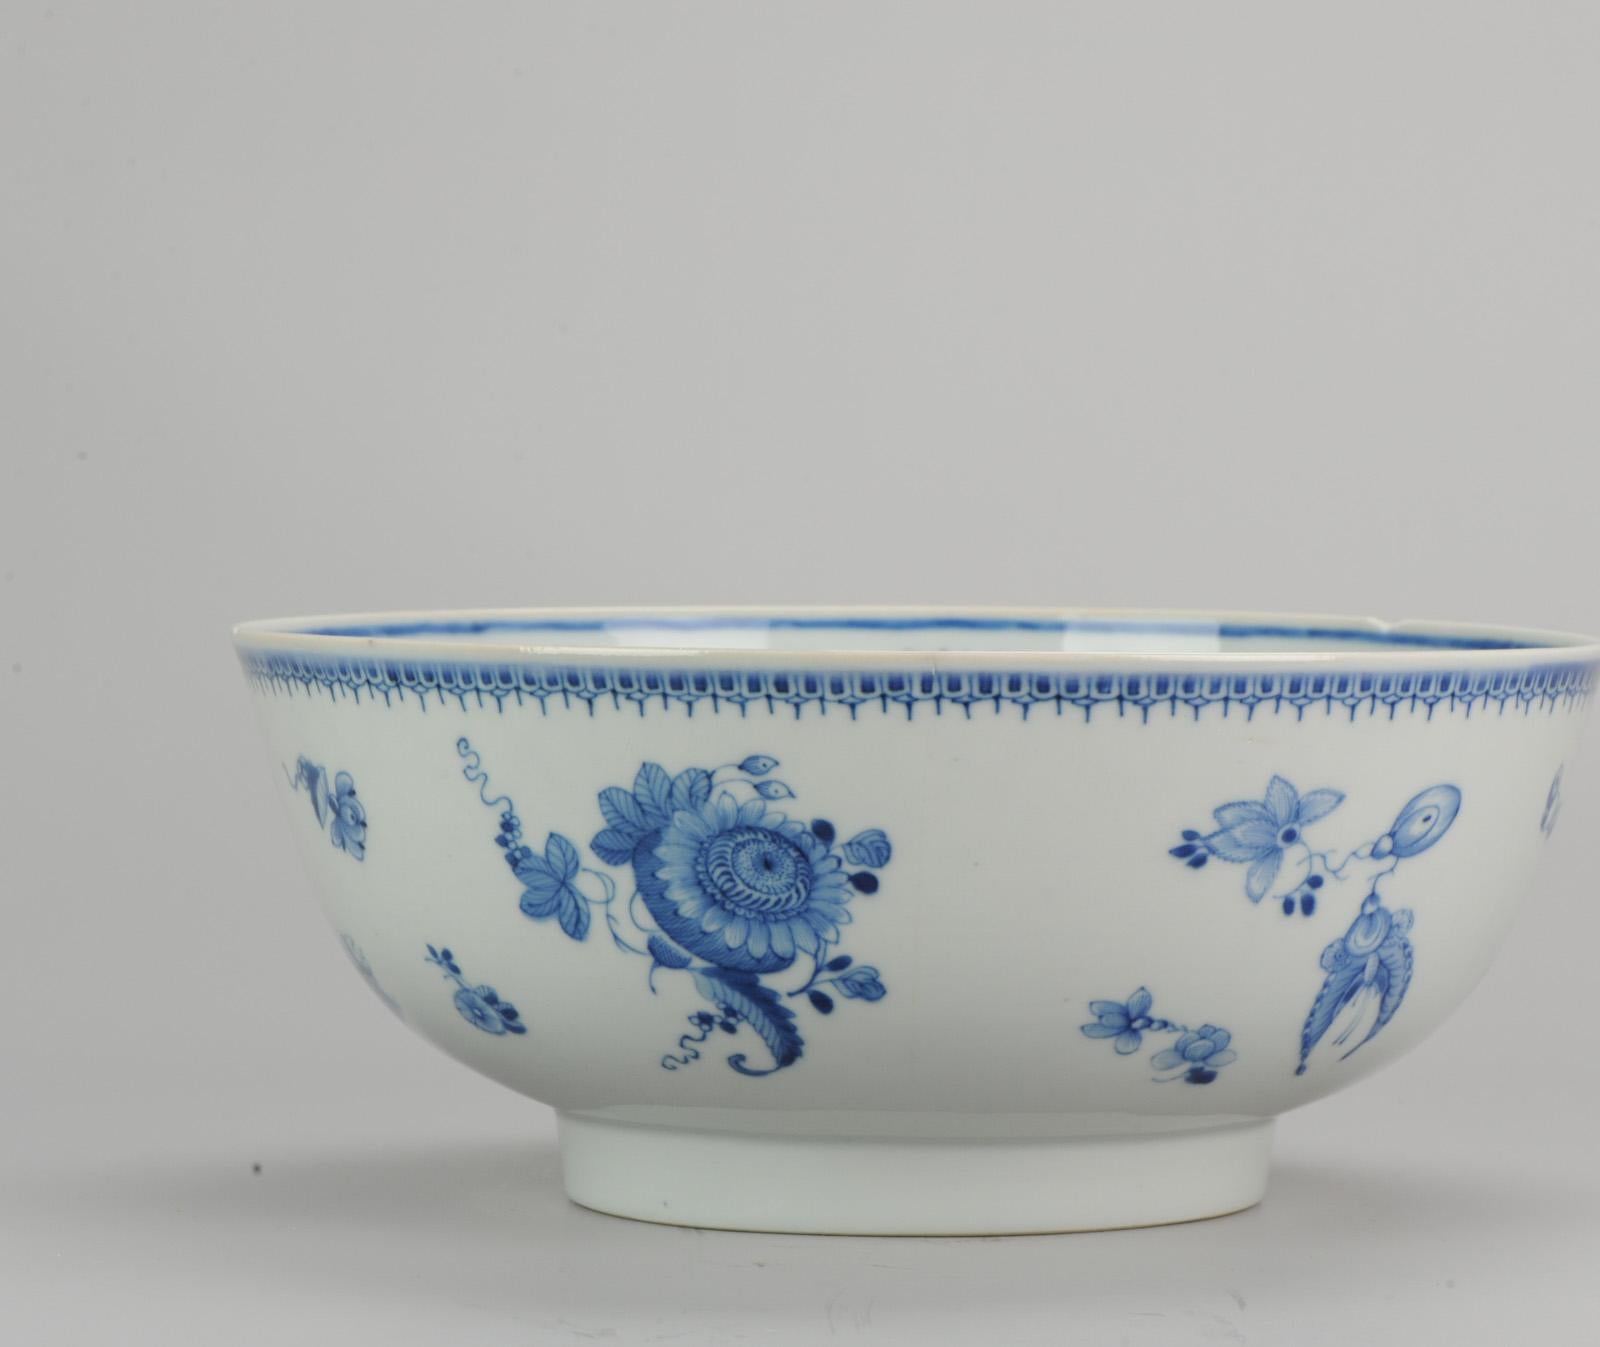 Porcelain Lovely Antique Chinese Qianlong Period Blue & White Punch Bowl Qing Dynasty